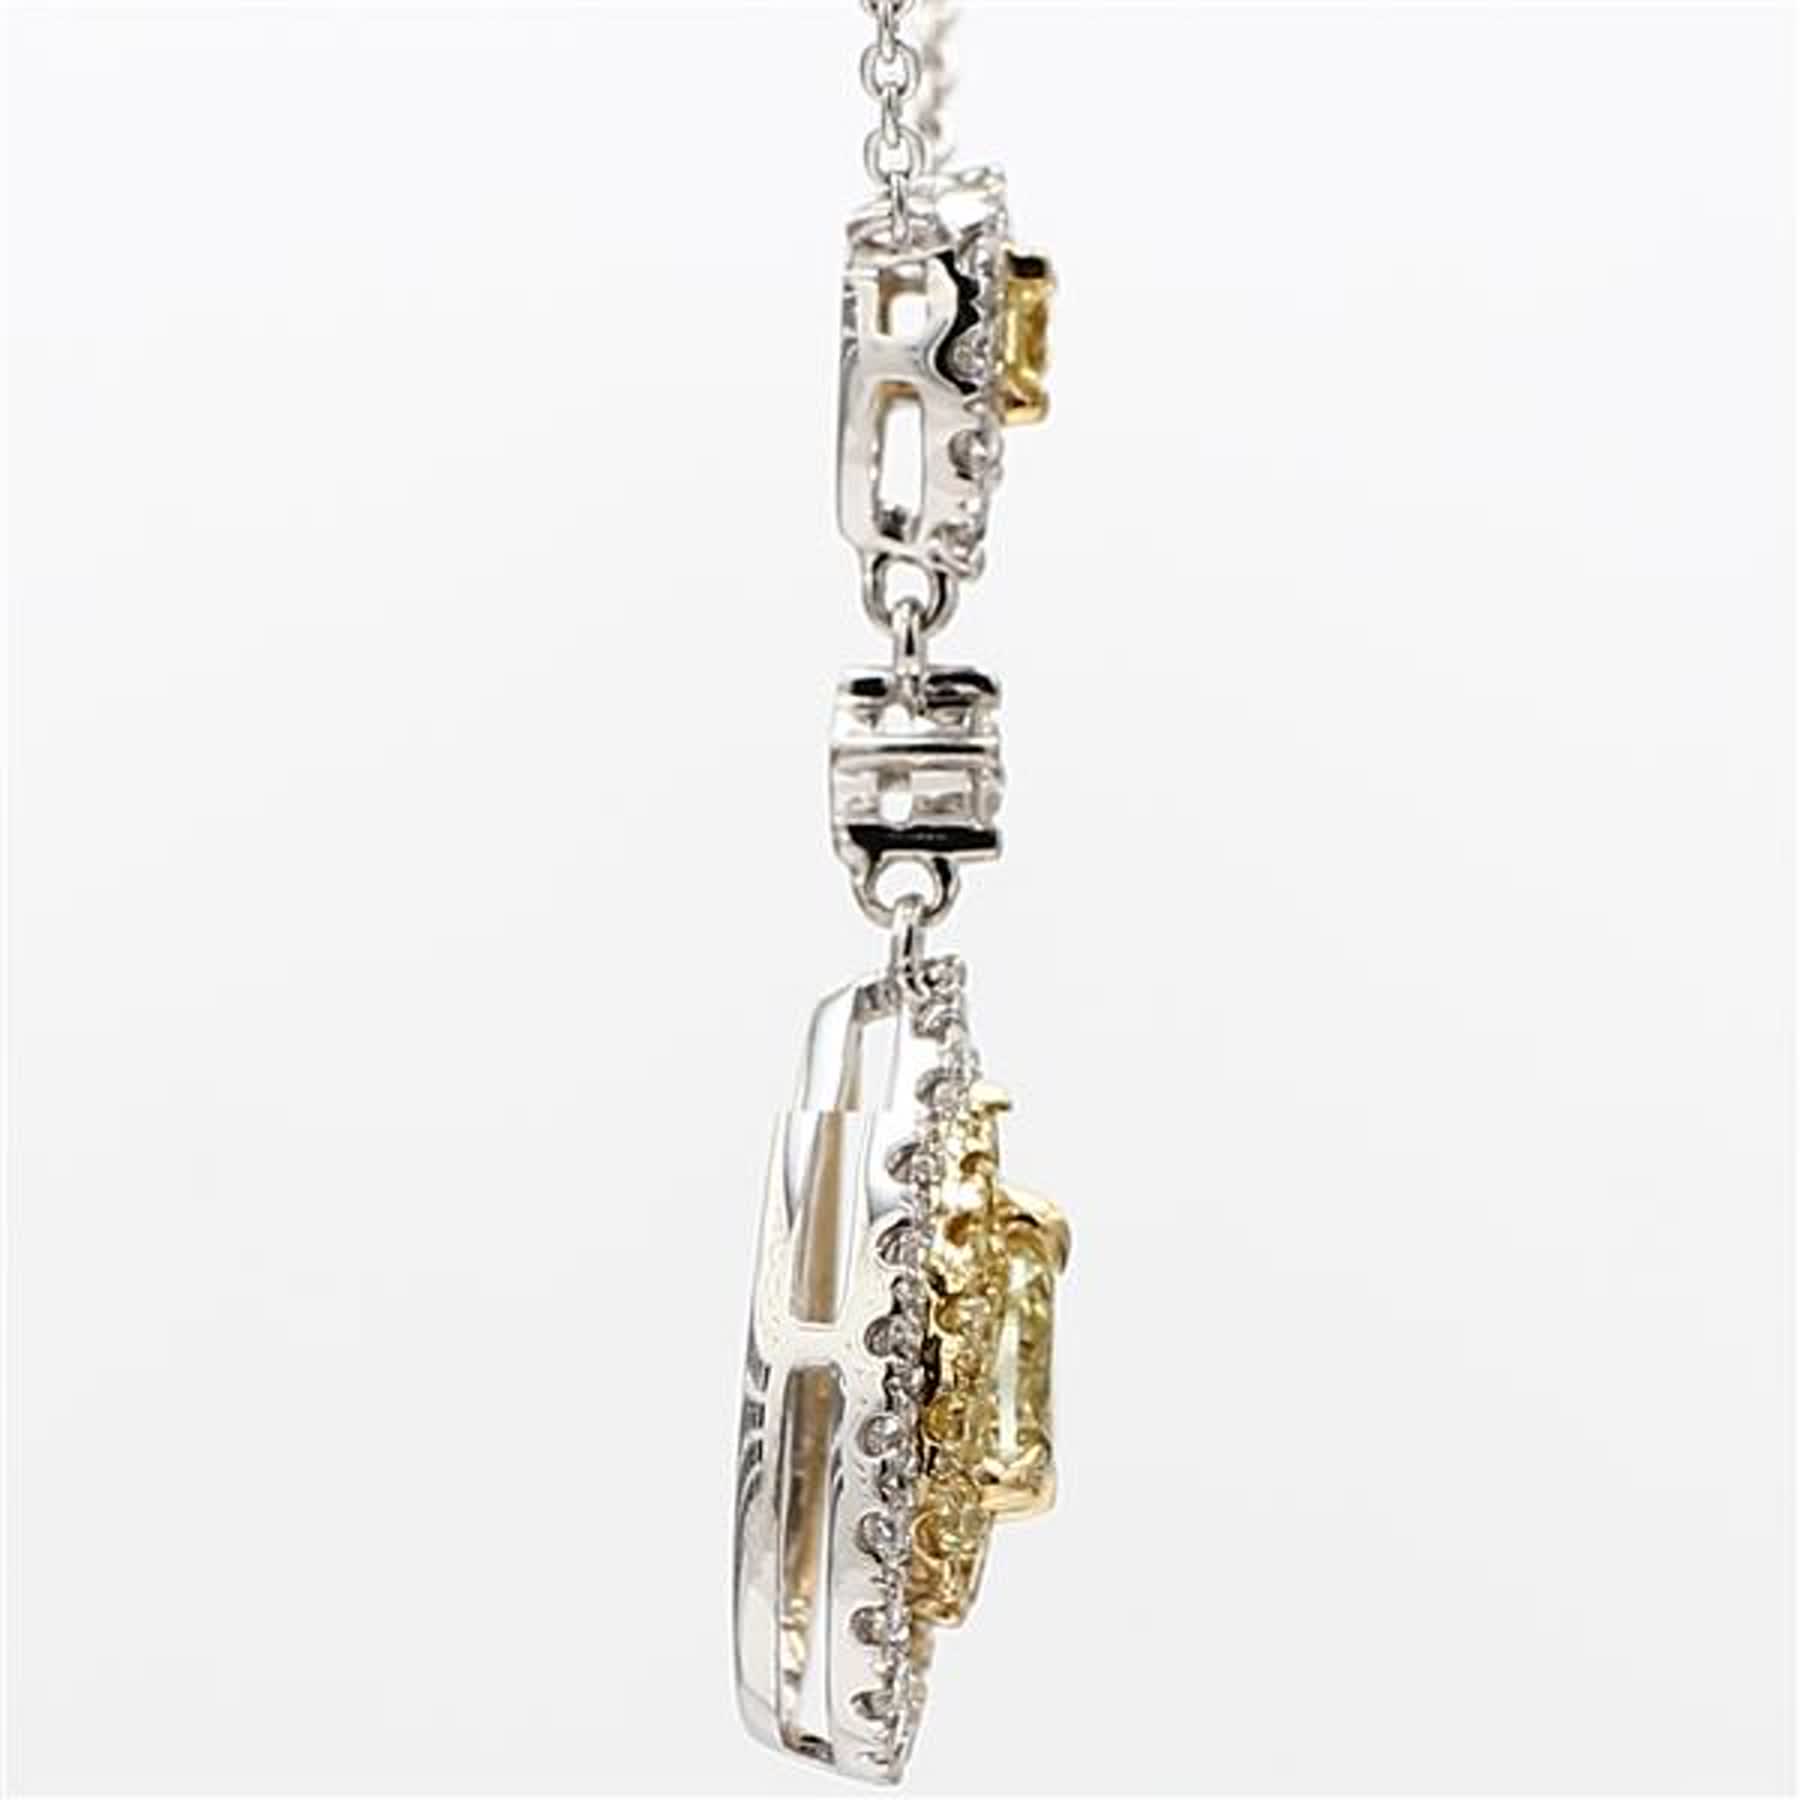 Natural Yellow Pear and White Diamond 1.07 Carat TW Gold Drop Necklace